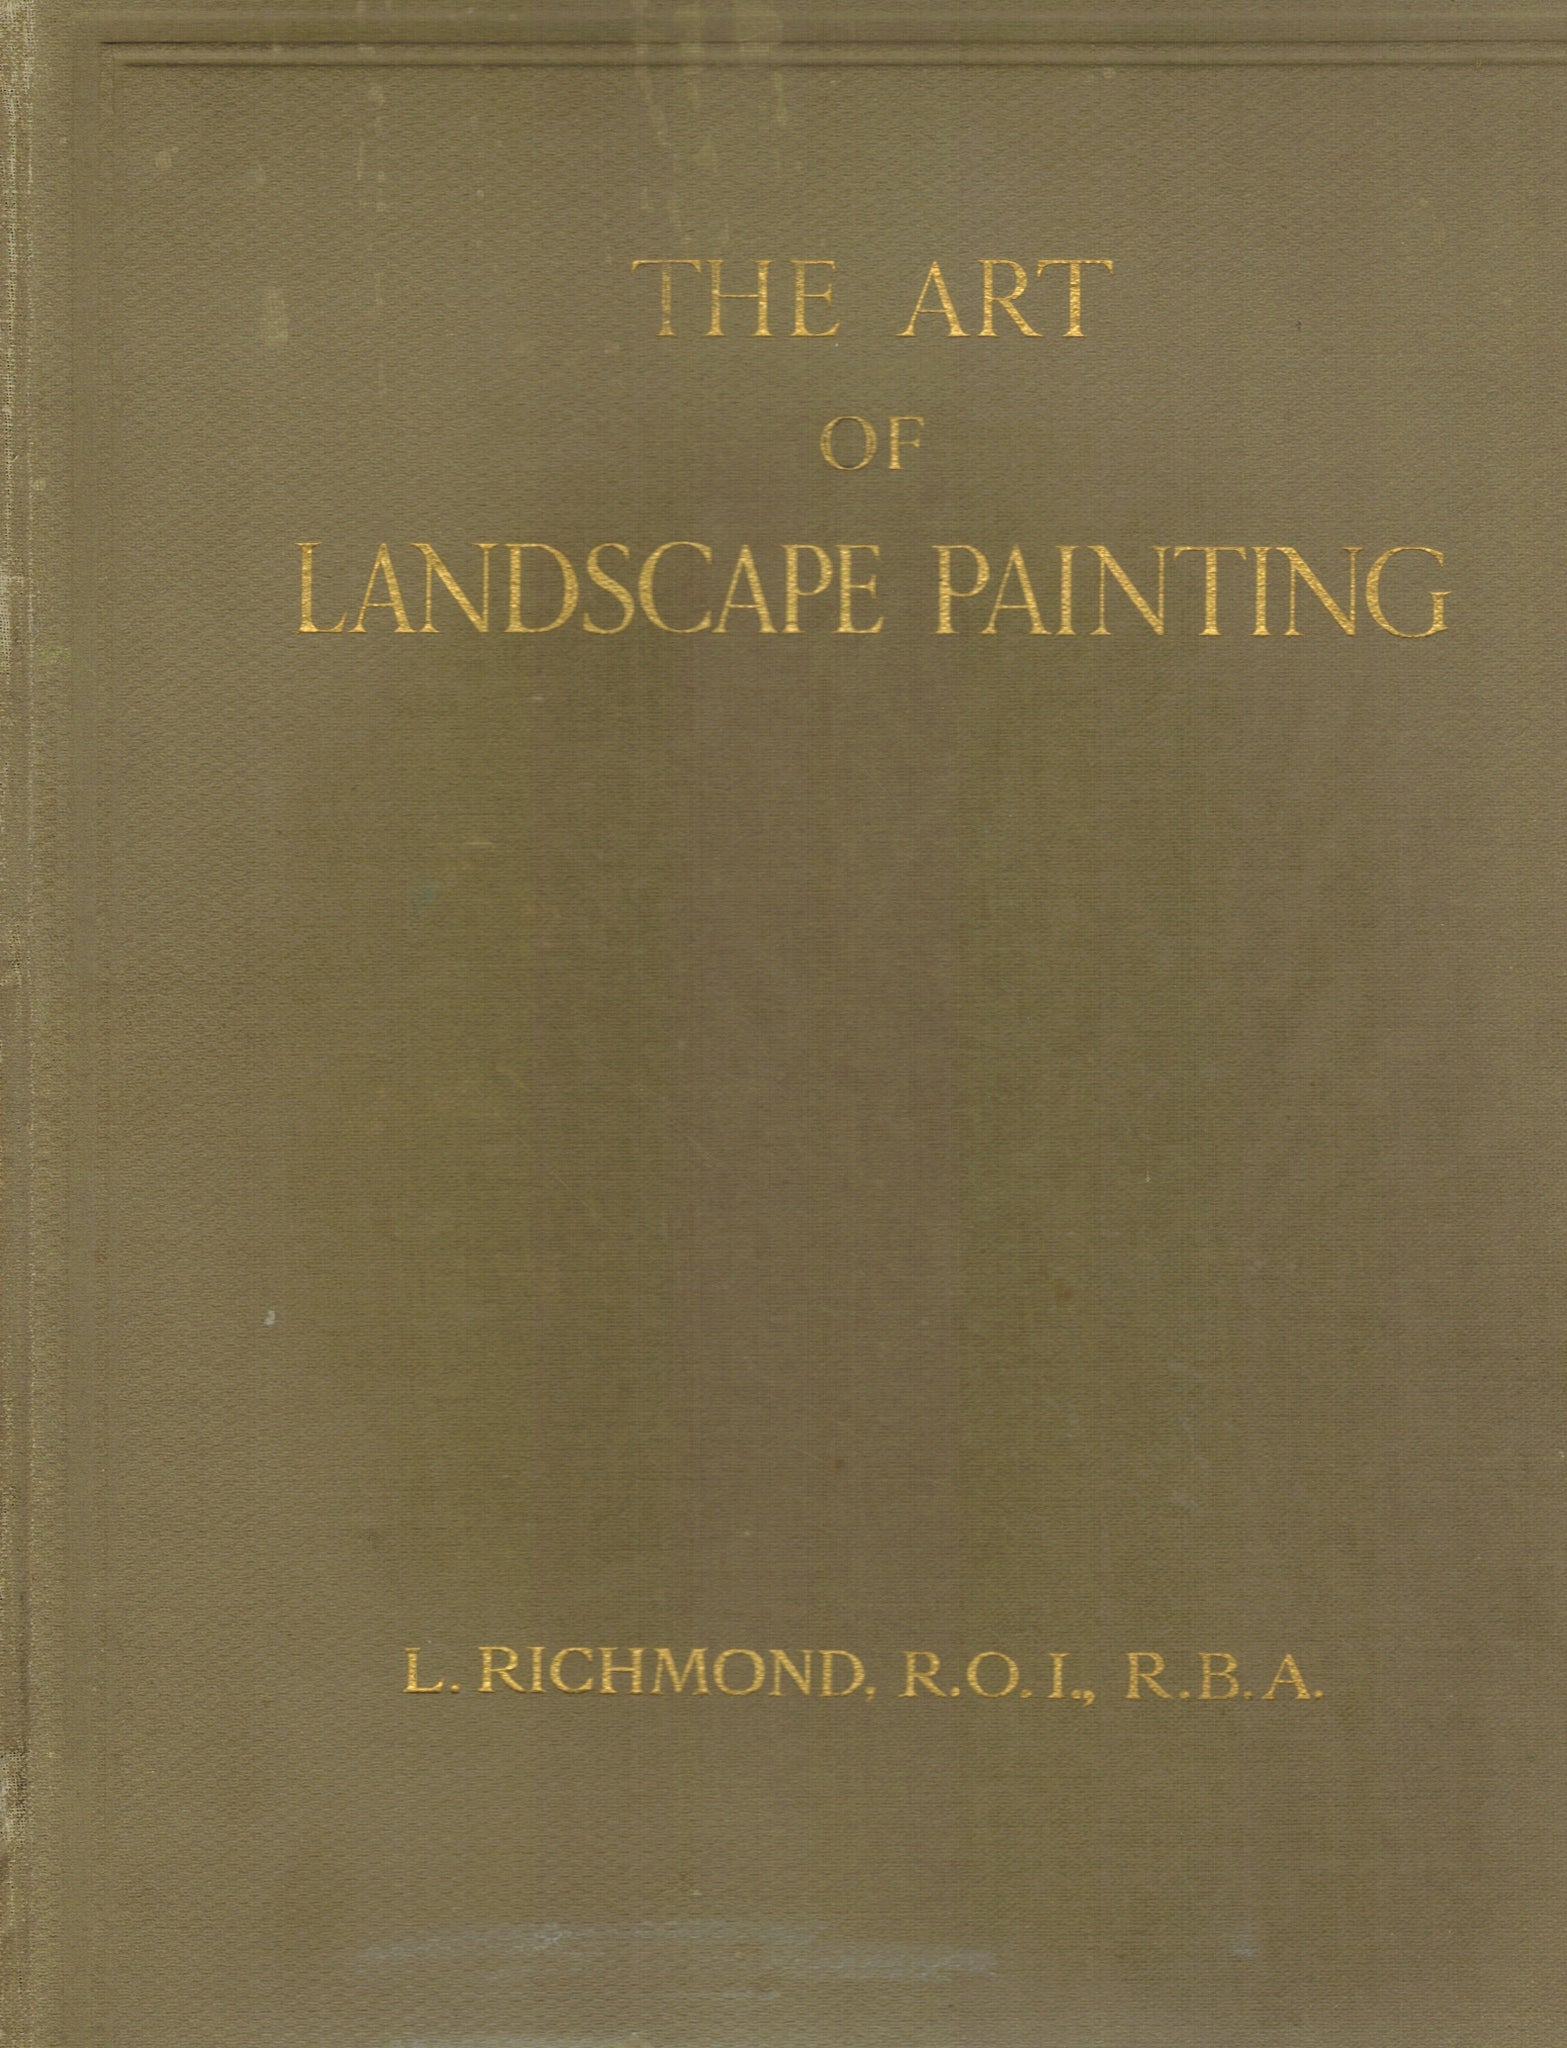 THE ART OF LANDSCAPE PAINTING